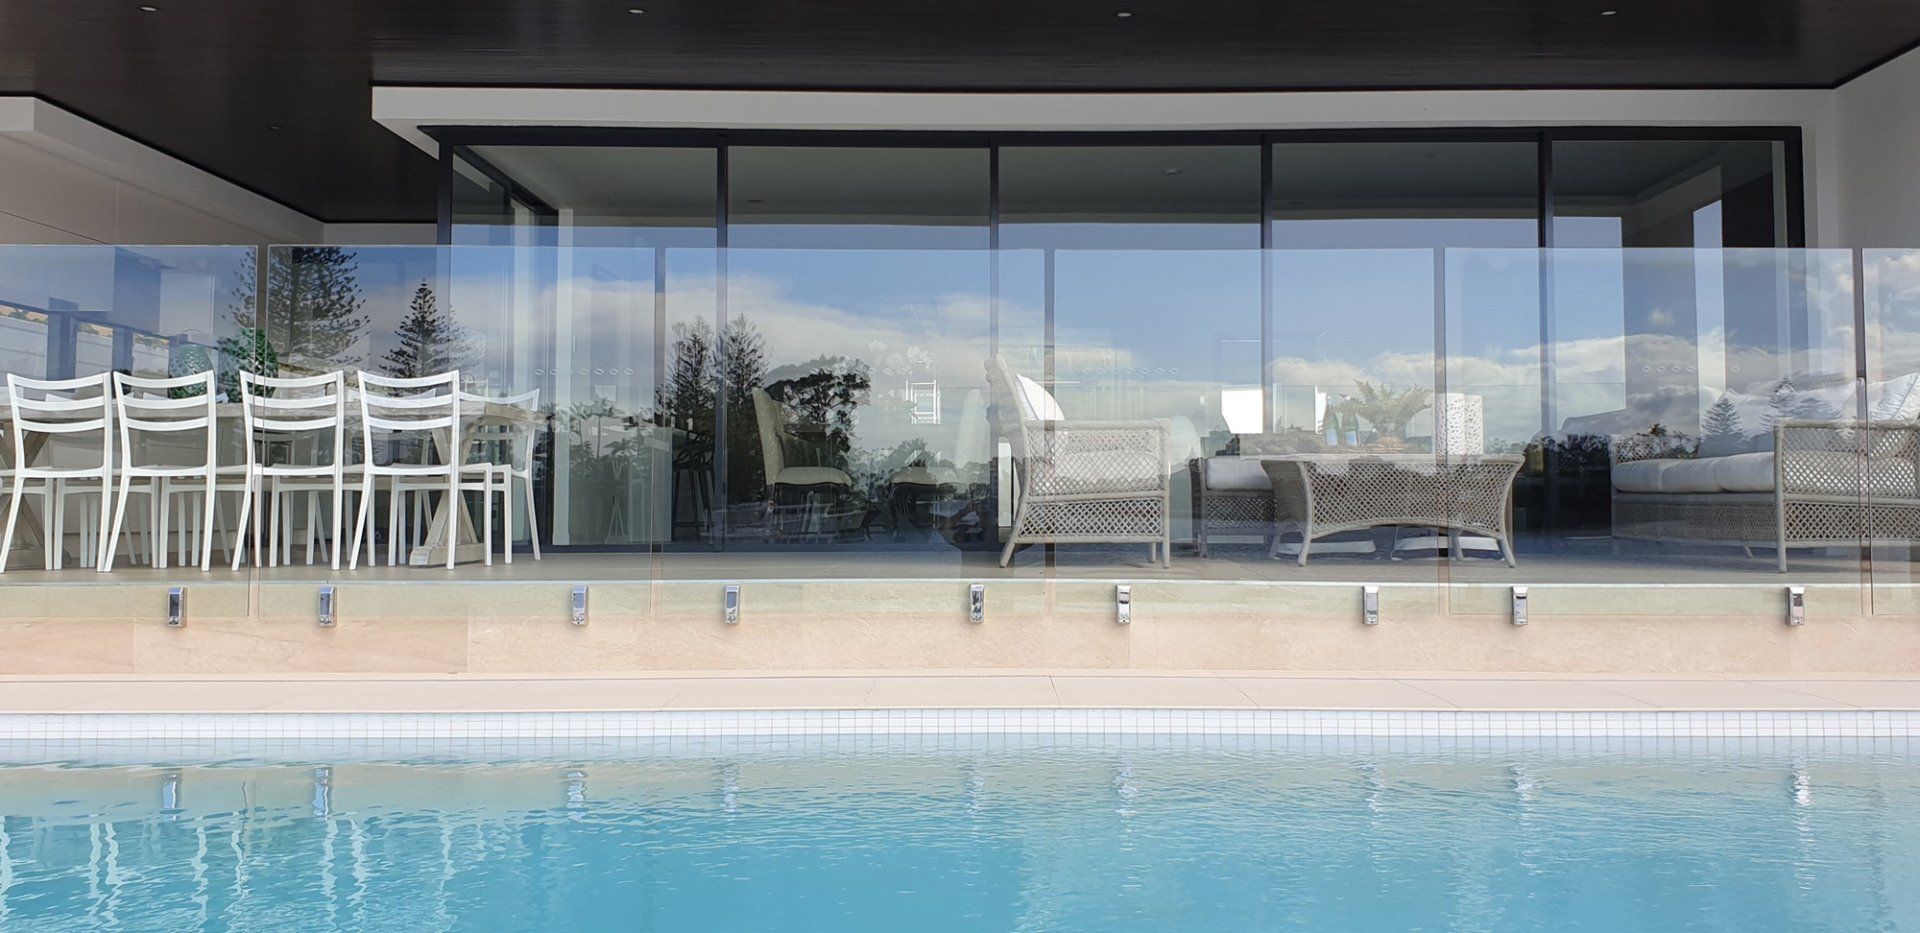 Quality Glass Pool Fencing in Gold Coast